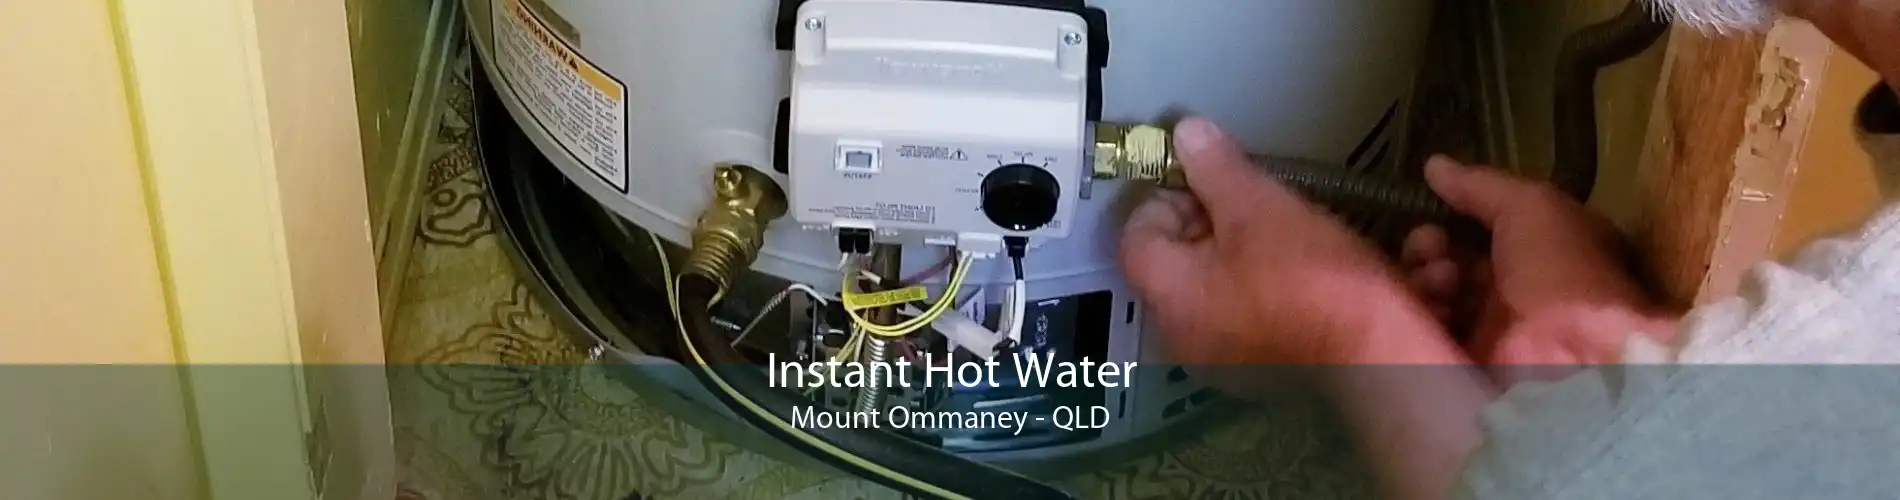 Instant Hot Water Mount Ommaney - QLD